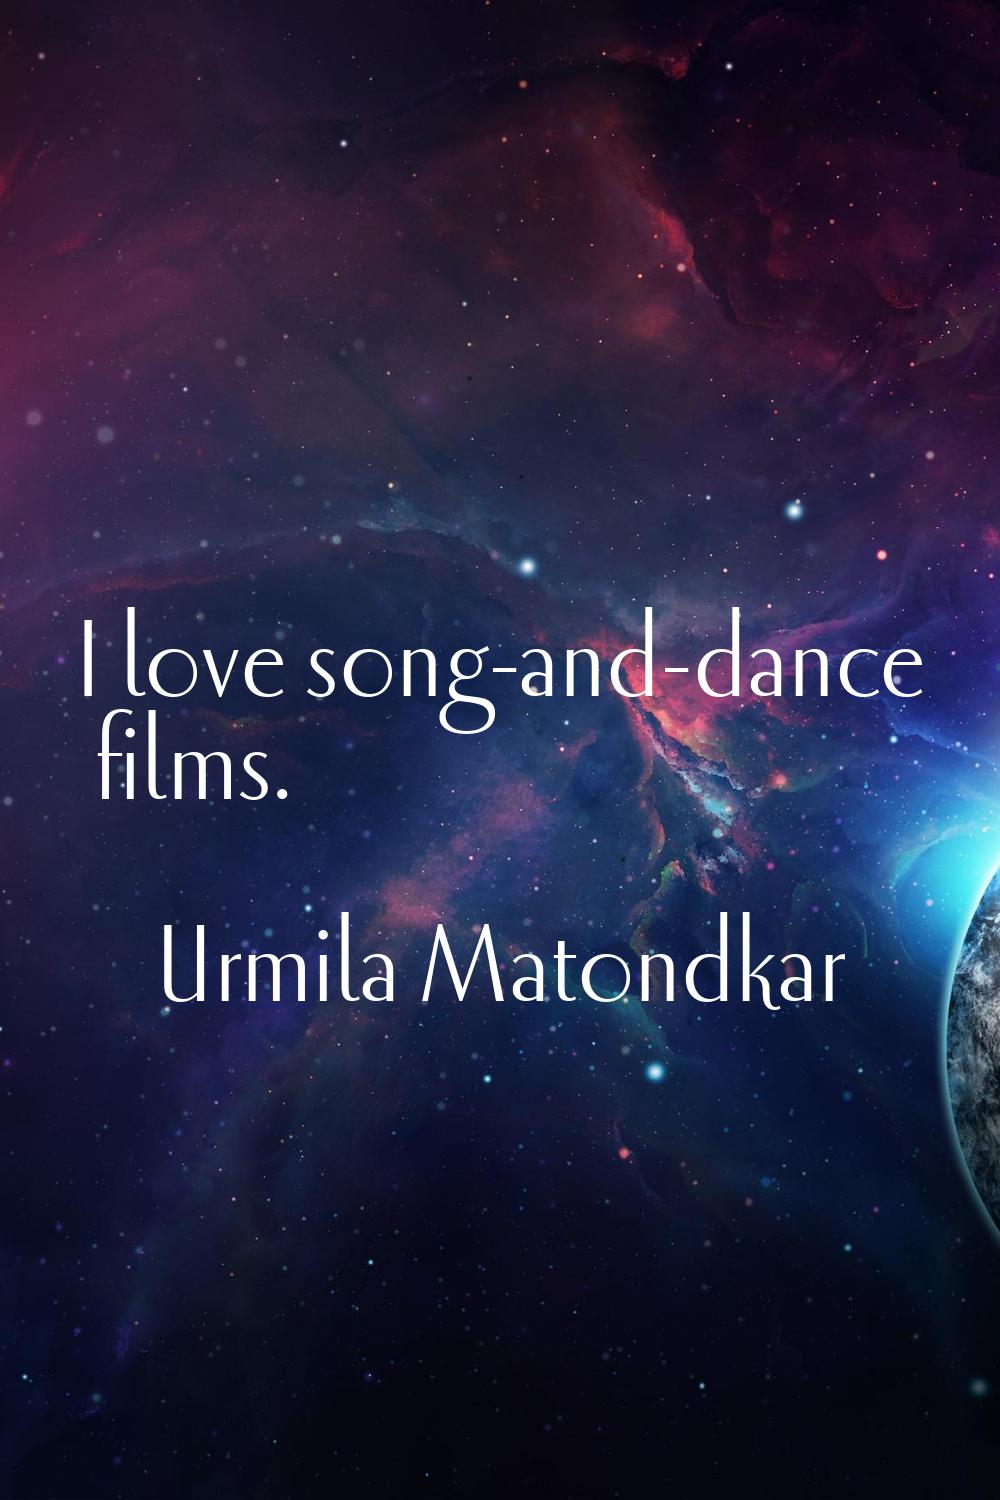 I love song-and-dance films.